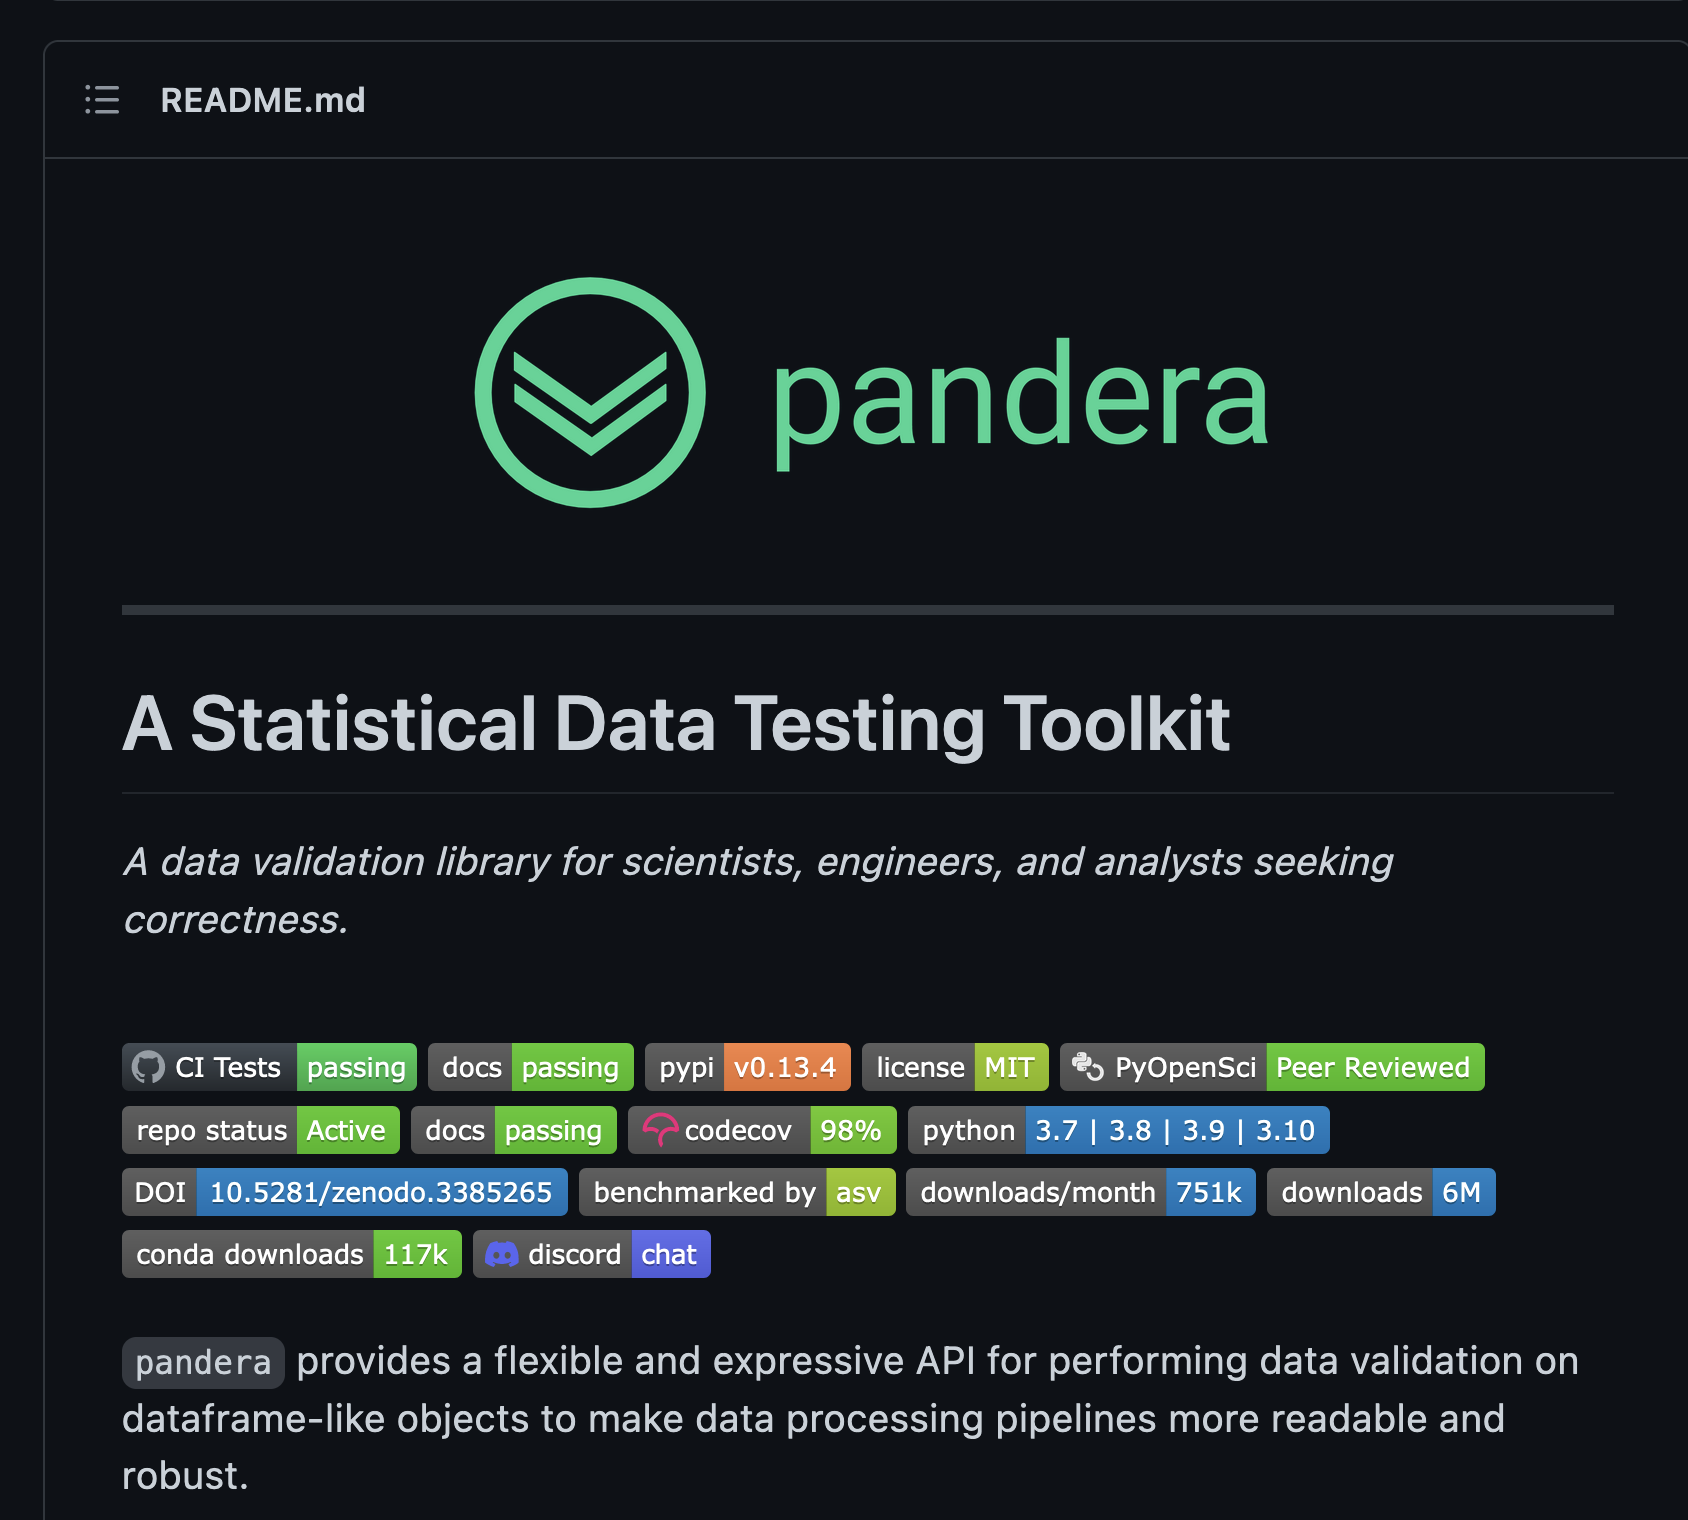 README landing page screenshot for the Pandera package. It has the Pandera logo at the top - which has two arrows in a chevron pattern pointing downward within a circle. Subtitle is statistical data testing toolkit. A data validation library for scientists, engineering, and analytics seeking correctness. Below that are a series of badges including CI tests passing, docs passing, version of Pandera on pypi (0.13.4), MIT license and that it has been pyOpenSci peer reviewed. There are numerous badges below that. Finally below the badges the text says, Pandera provides a flexible and expressive API for performing data validation on dataframe-like objects to make data processing pipelines more readable and robust.